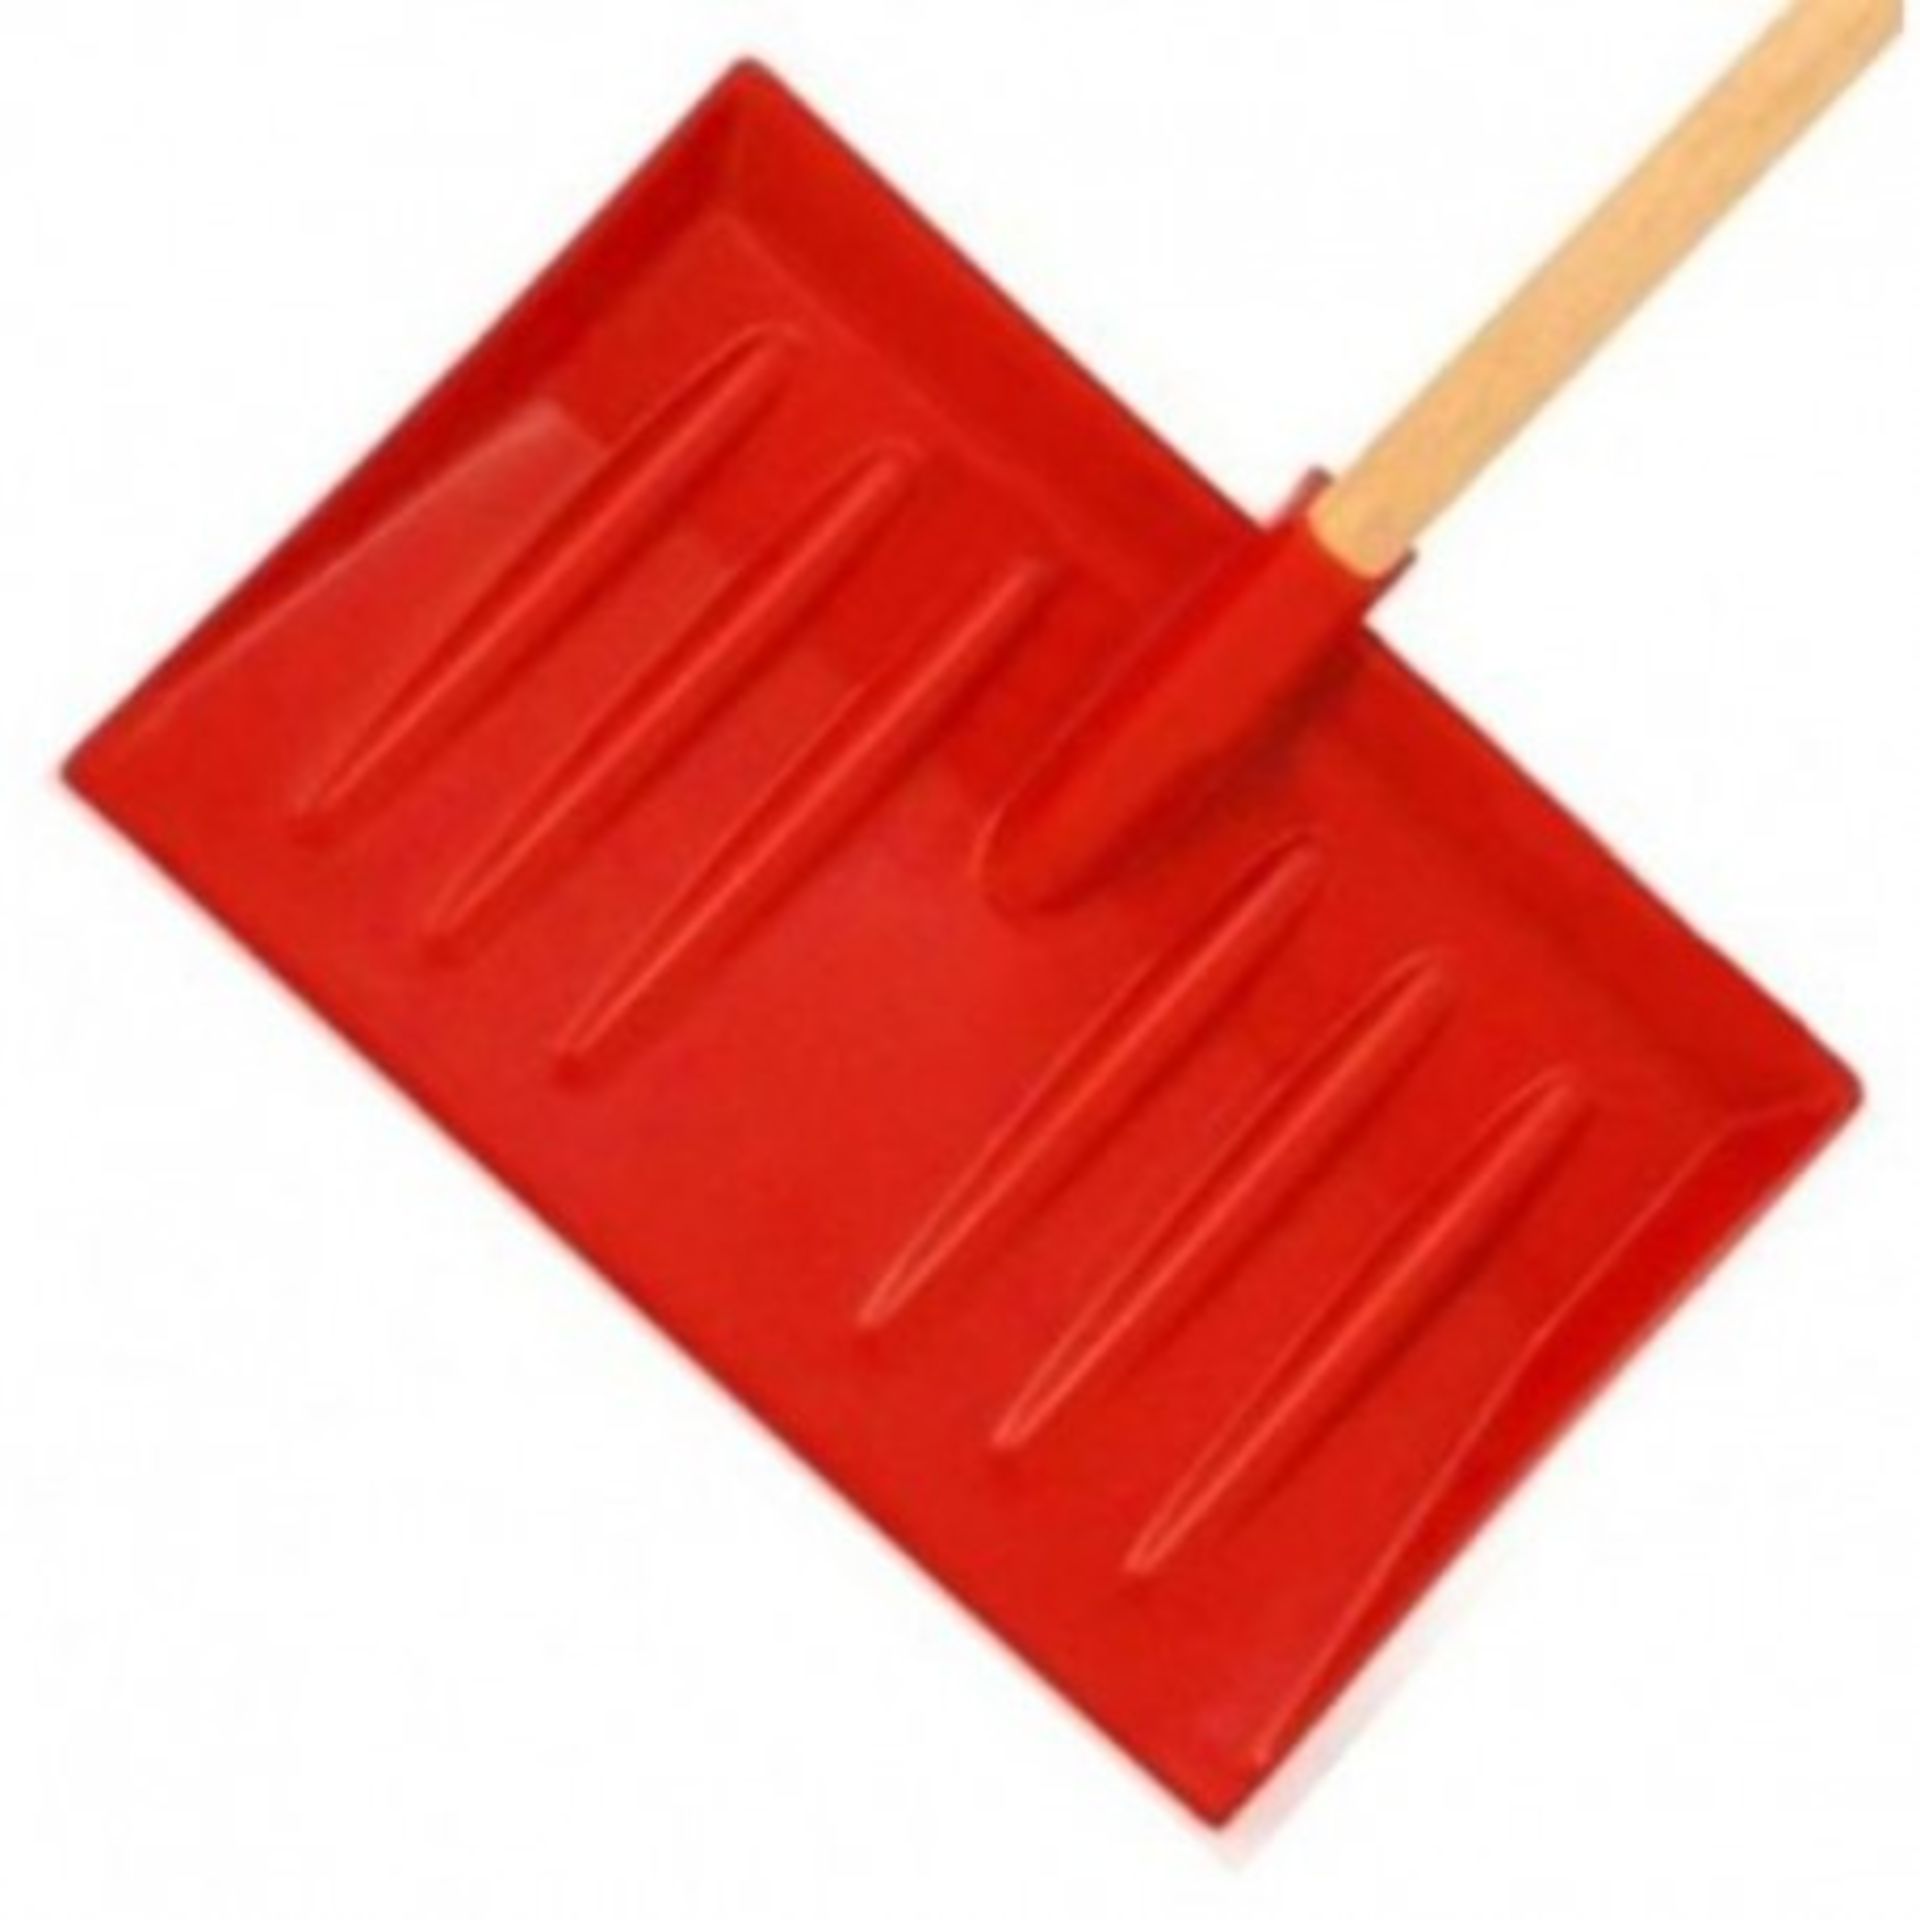 V Brand New TRADE QUANTITY! 10 x INDUSTRIAL SNOW SHOVEL WITH EXTRA WIDE HEAD AND WOODEN HANDLE / Sit